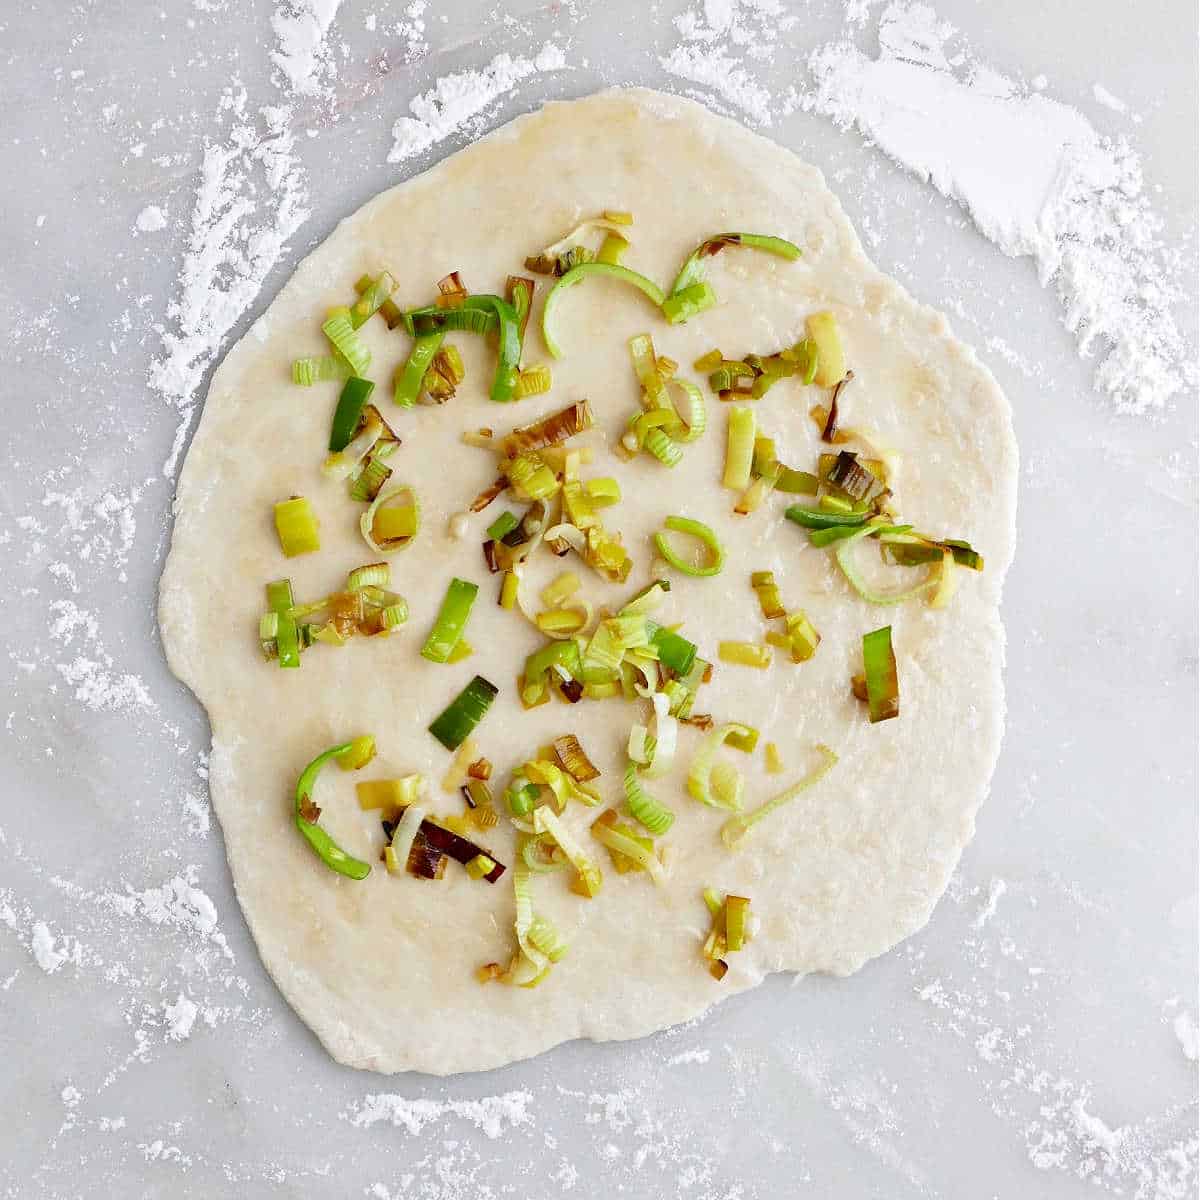 dough rolled into a circle and topped with cooked leeks on a floured surface